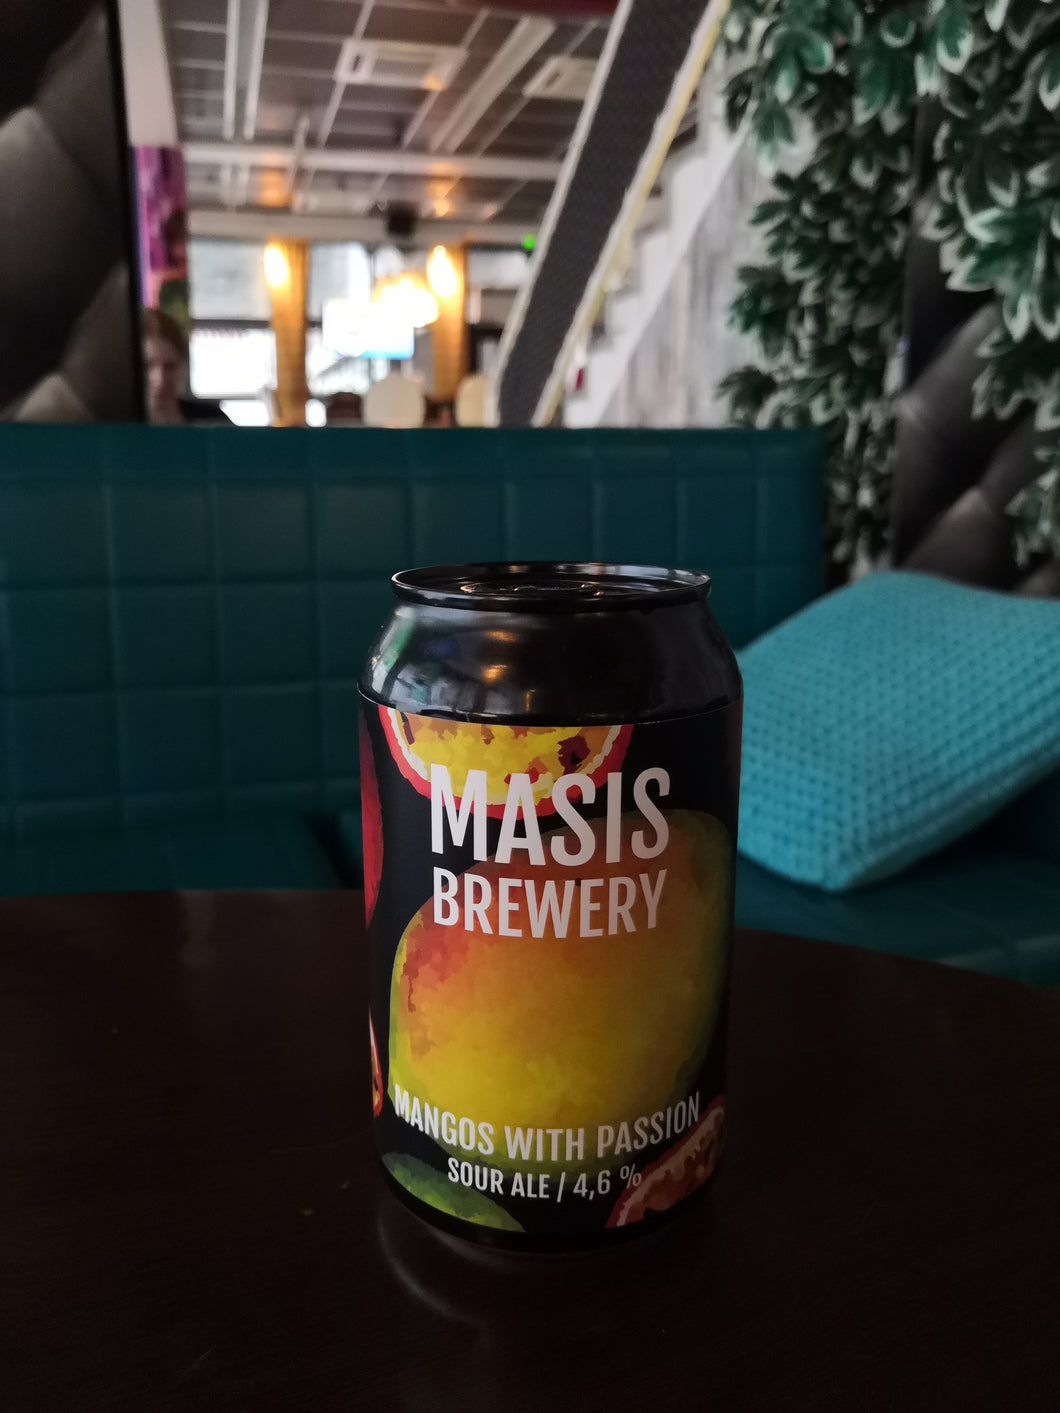 Masis Brewery Mangos with Passion